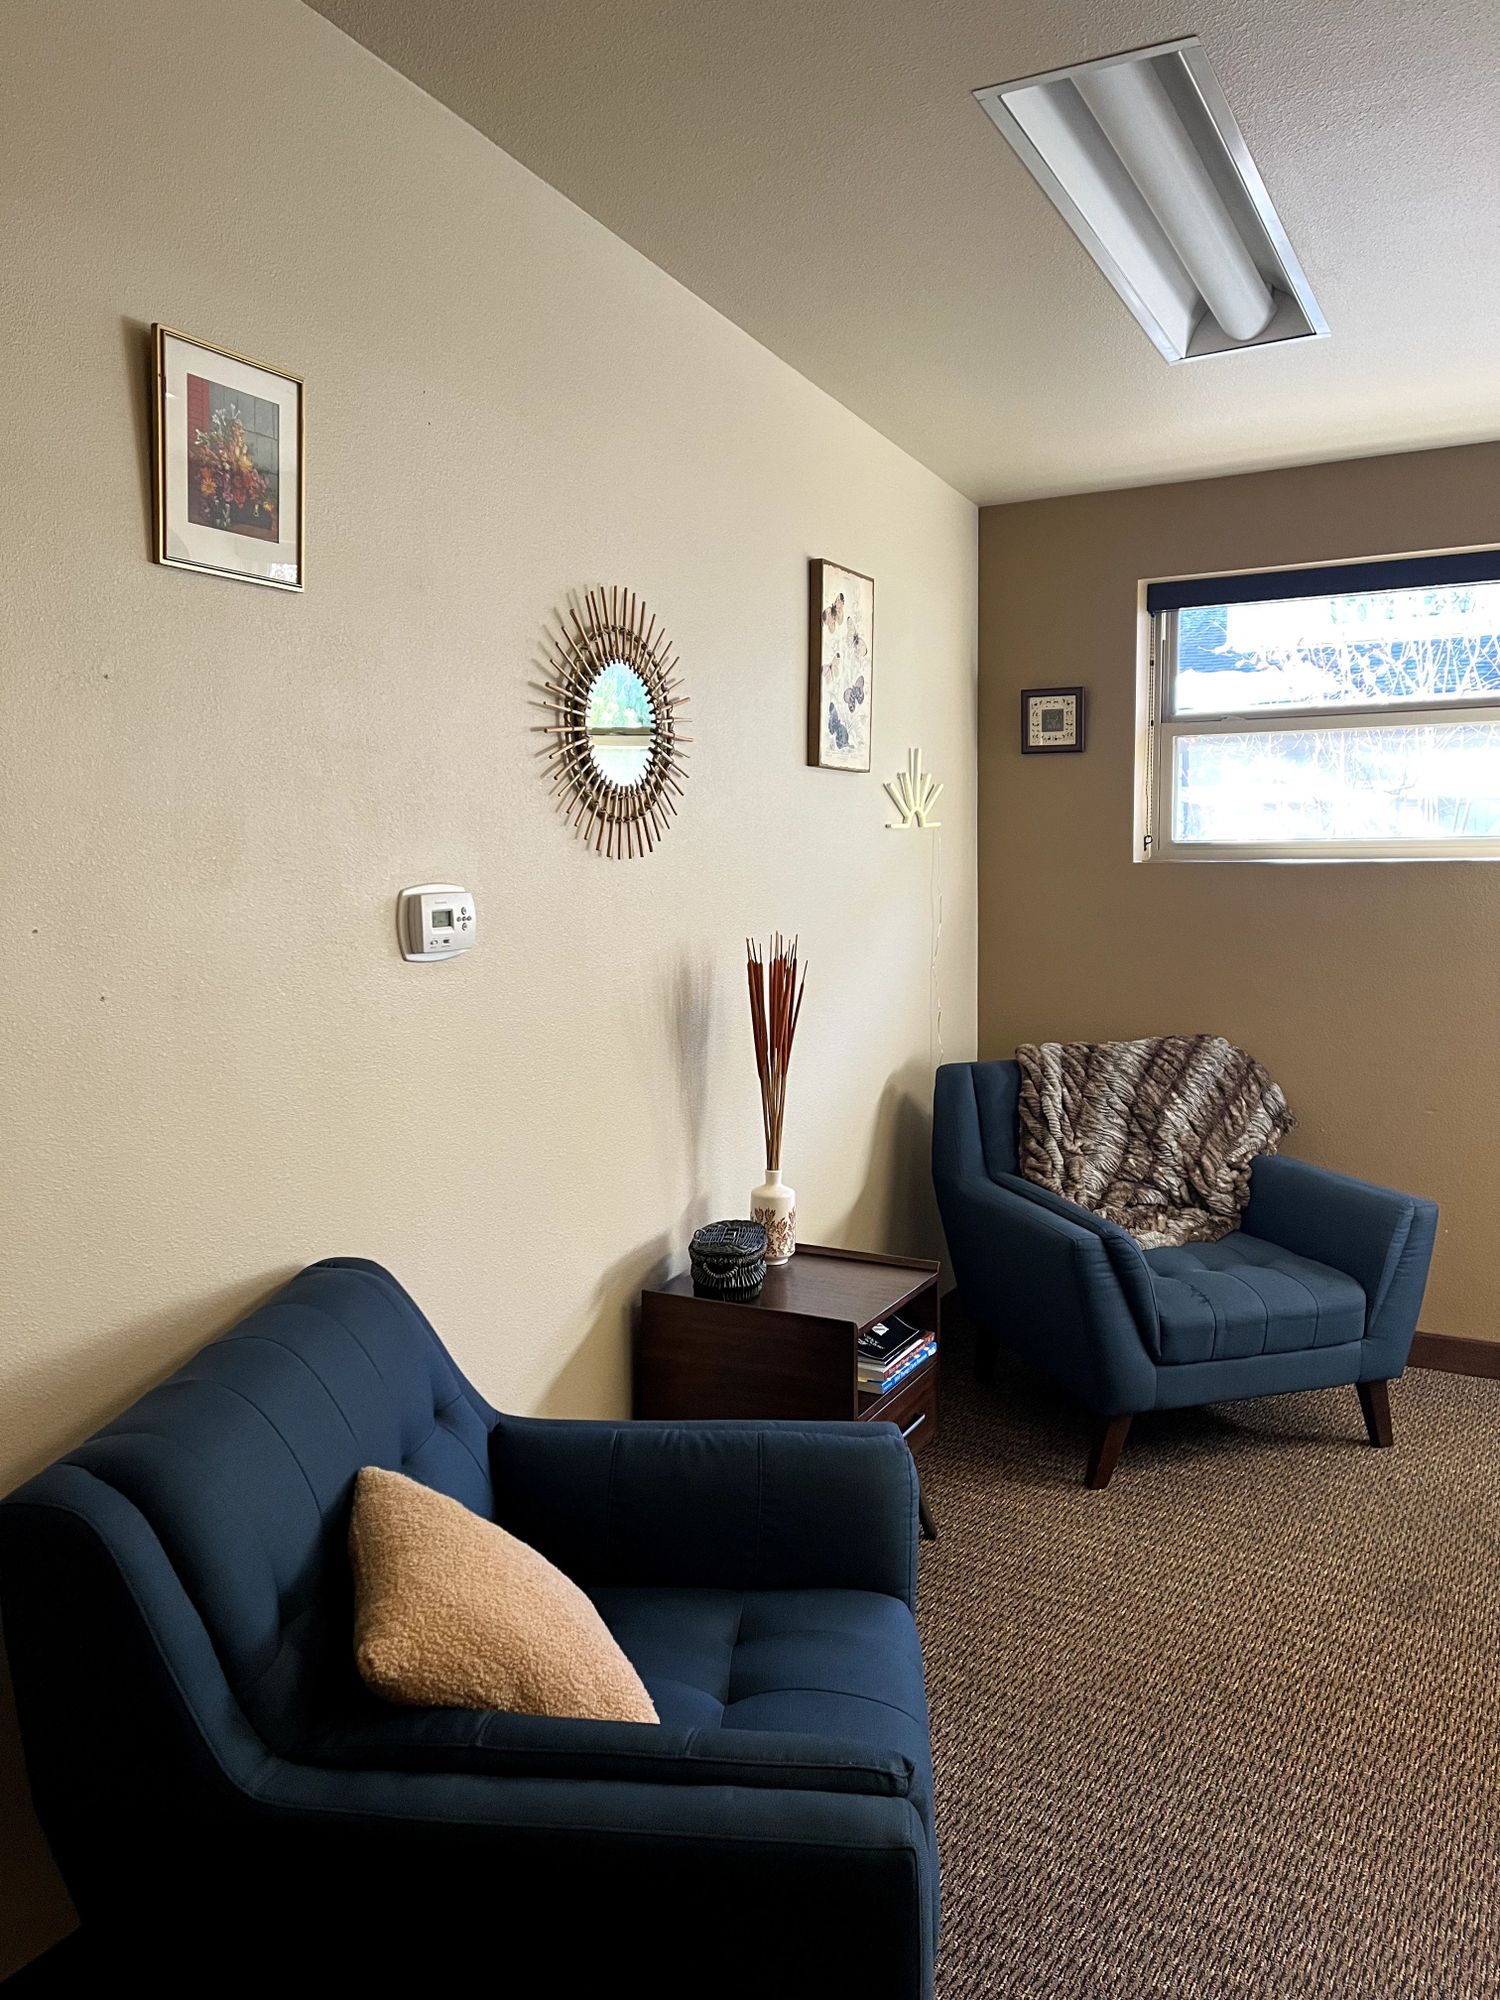 Gallery Photo of A cute and comfy counseling office located in the WJK building in Old Town Fort Collins. 